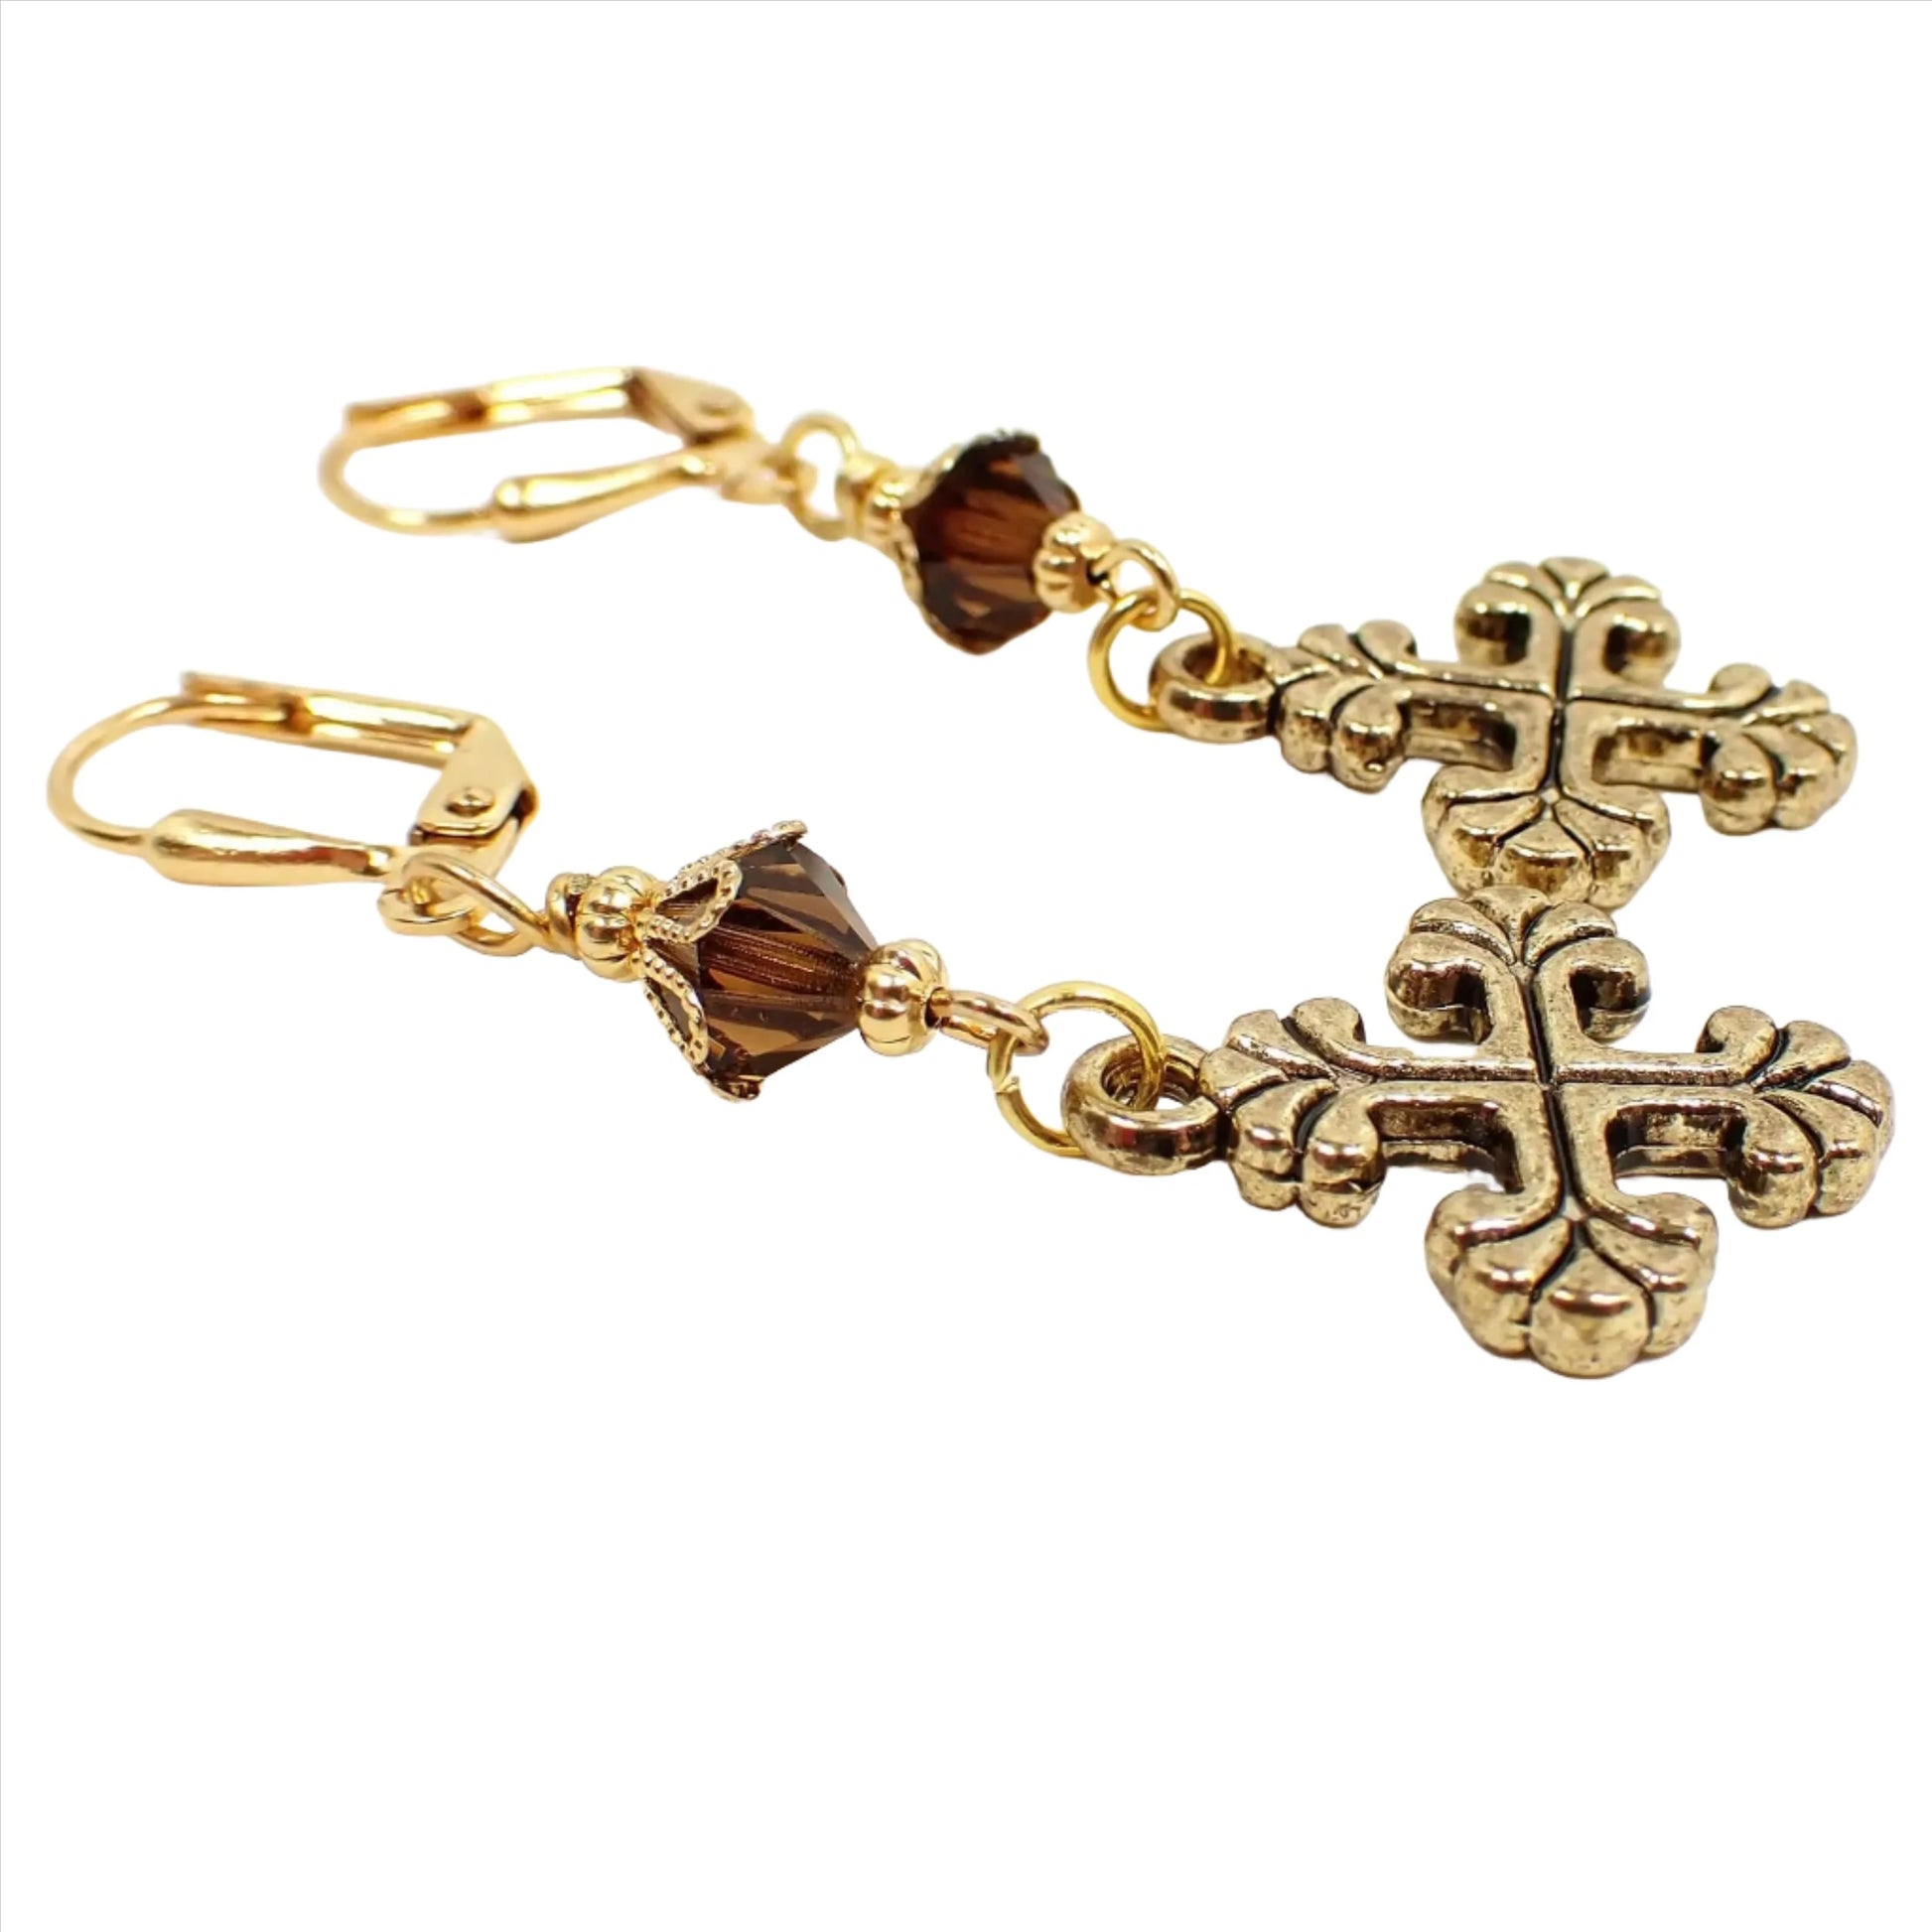 Angled view of the handmade cross earrings. The metal is gold plated in color. There are brown faceted glass crystal beads at the top. The bottom cross charms are antiqued gold plated and have an even cross design with flared out scalloped ends.